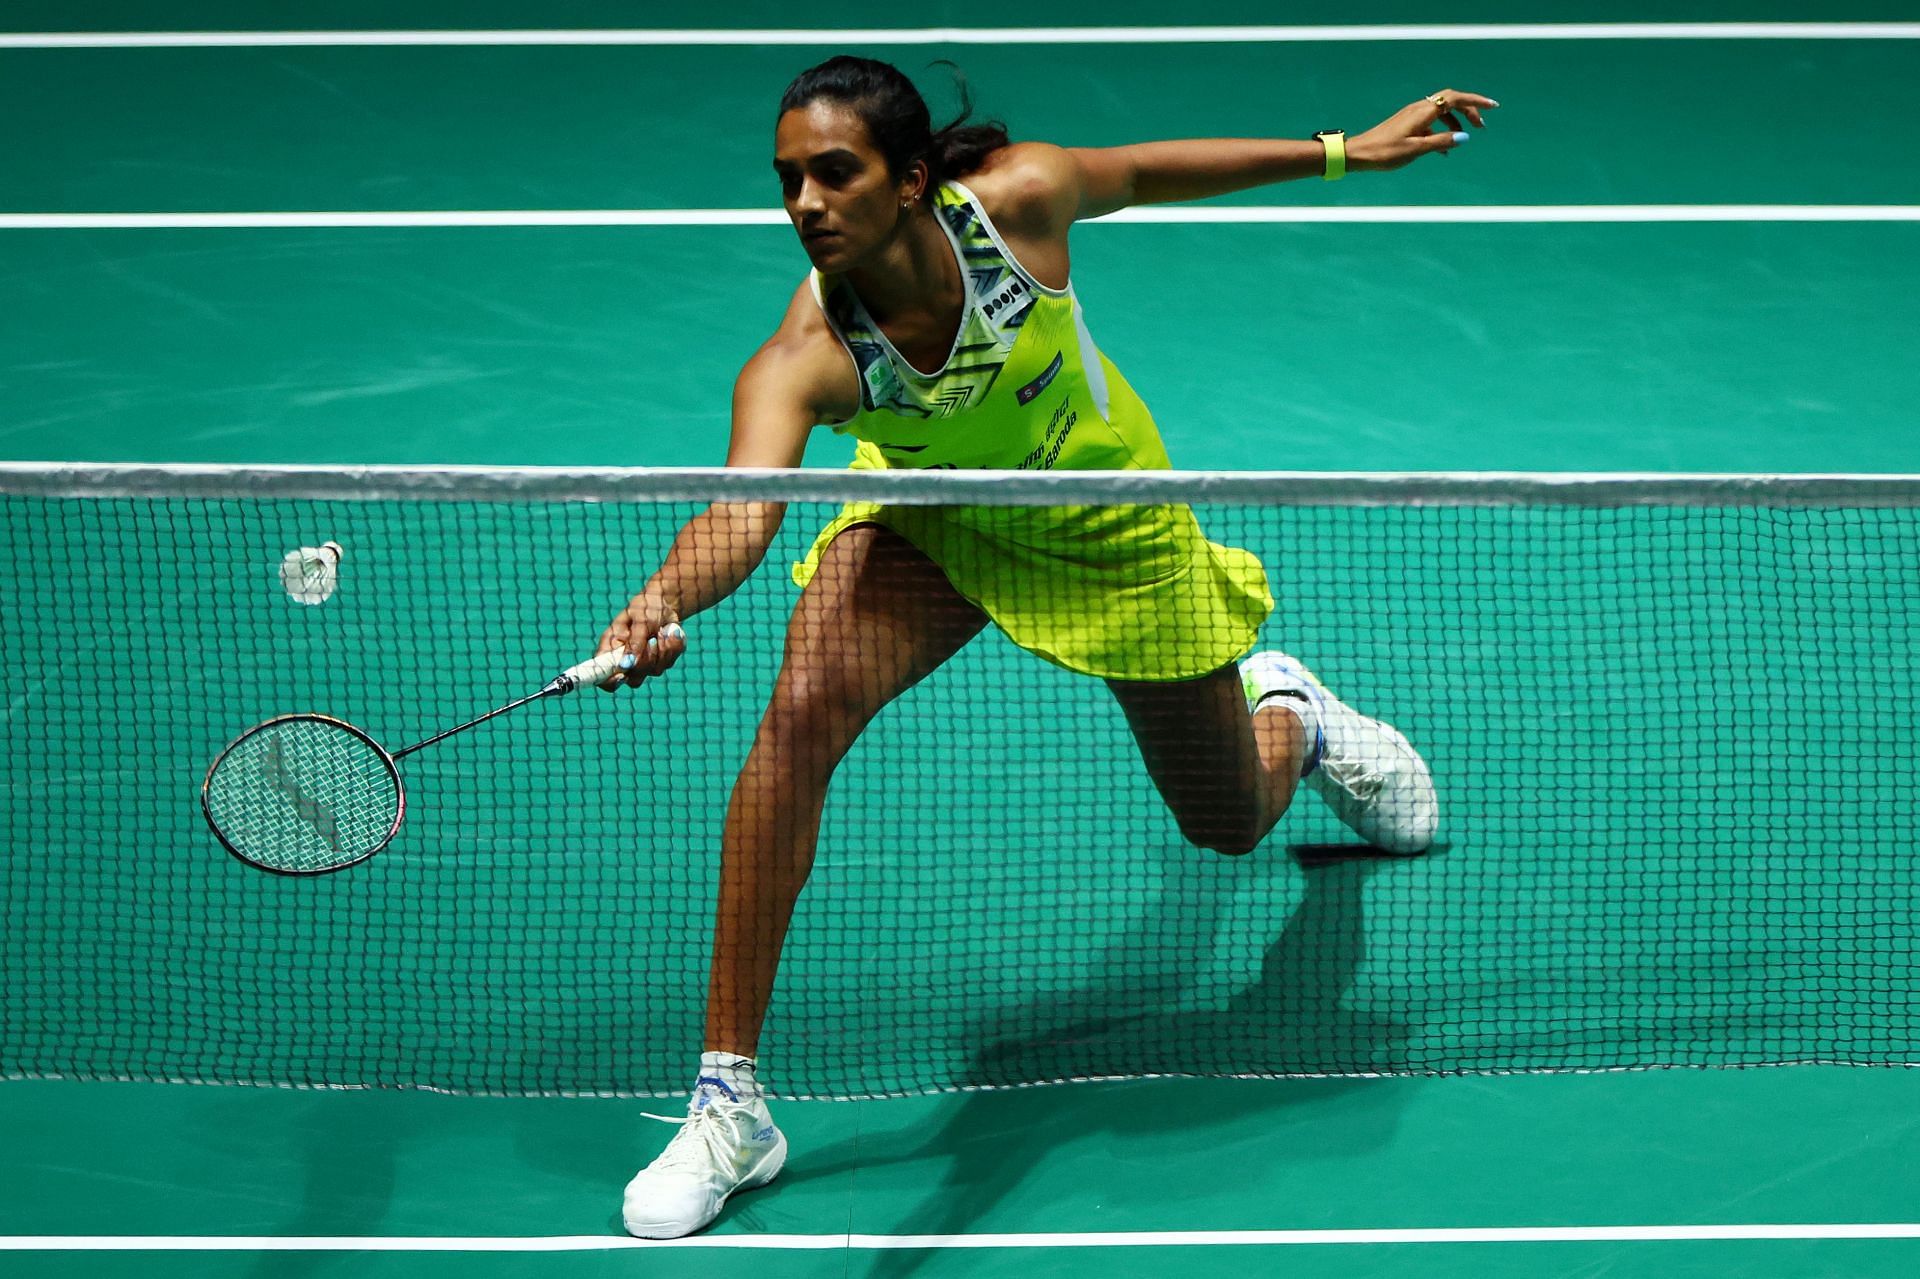 PV Sindhu will lead the Indian badminton team at the 2022 Commonwealth Games. (Image courtesy: Getty Images)